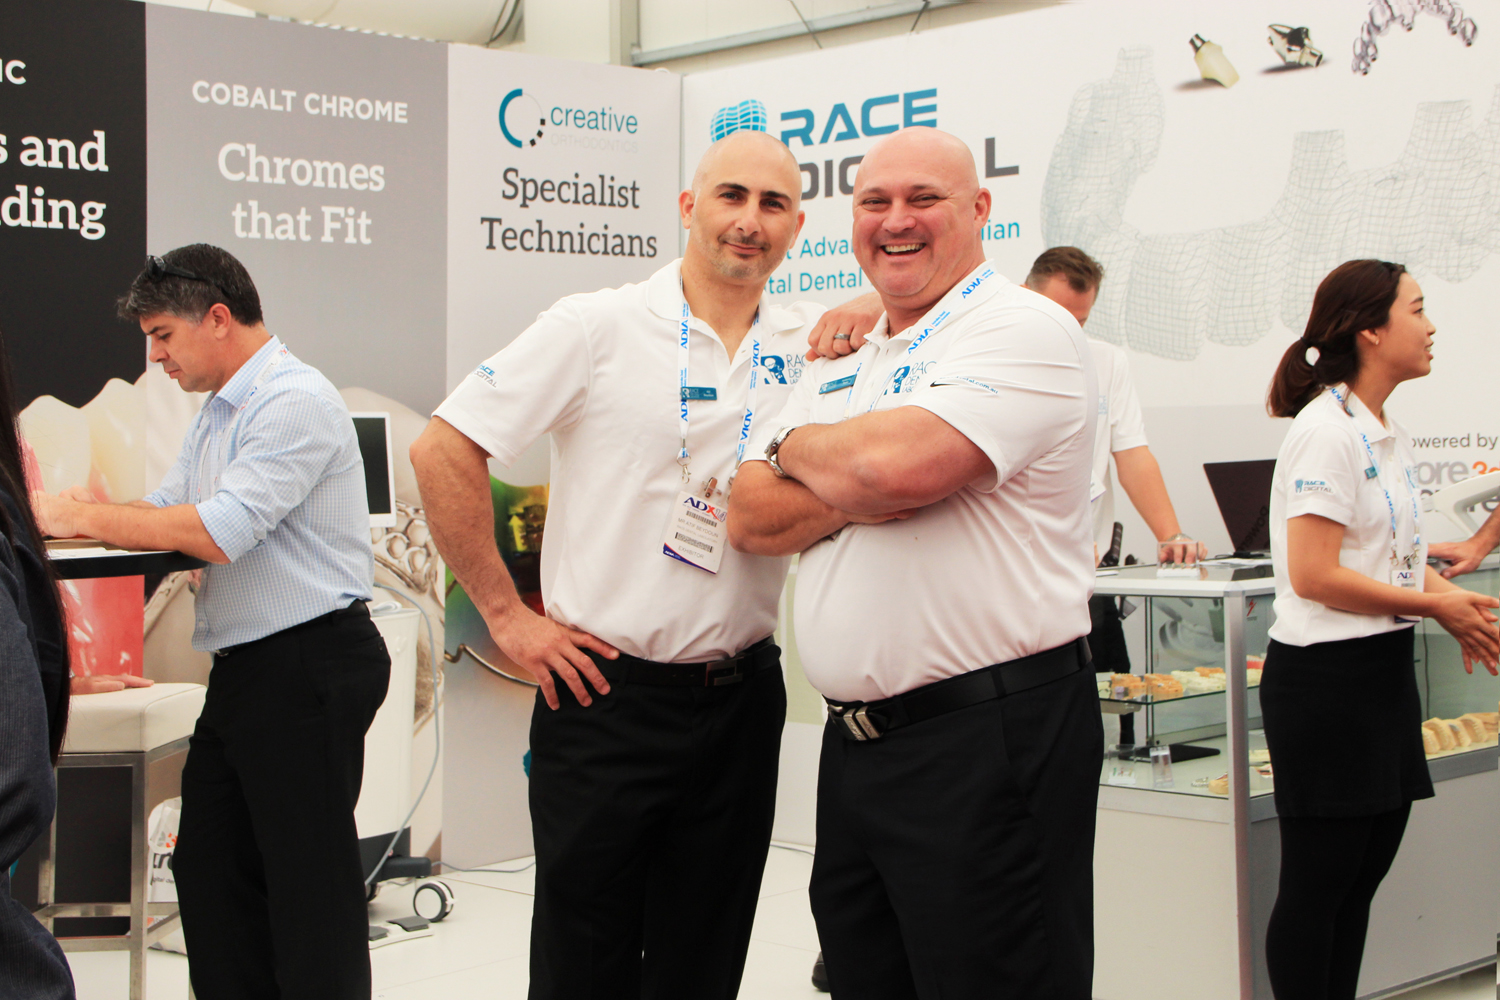 Race Dental at the ADX14